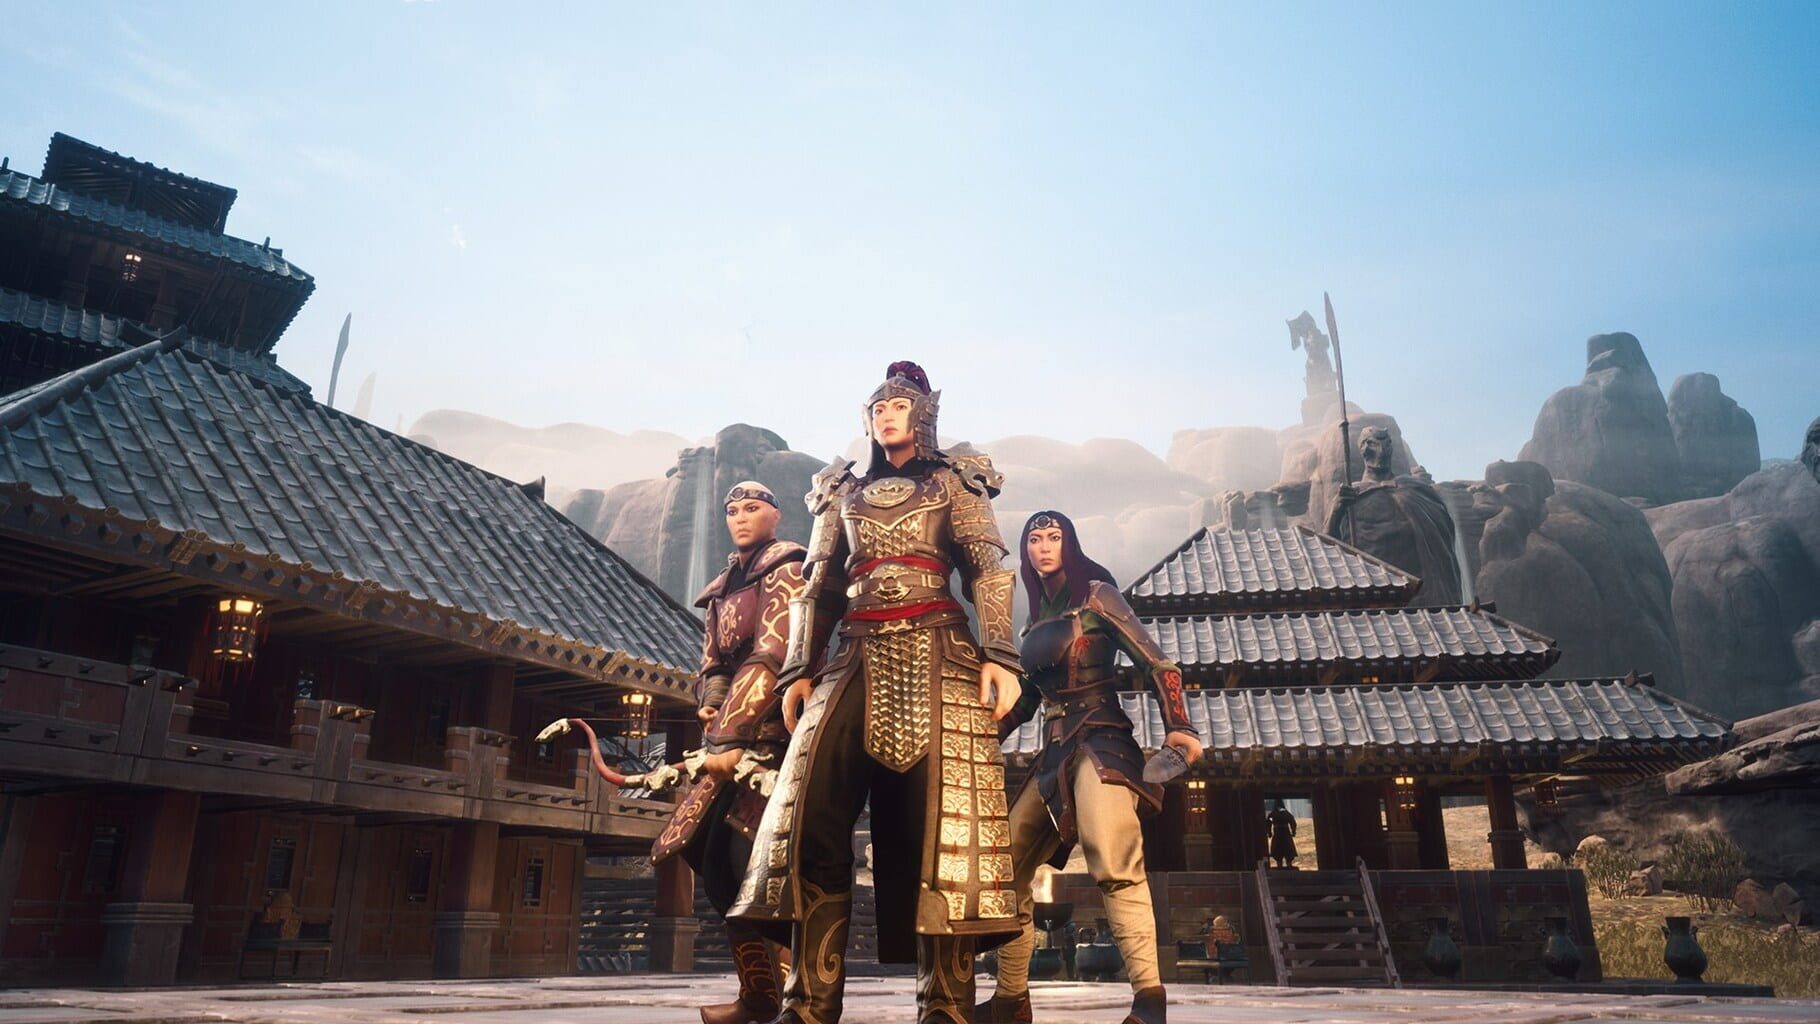 Conan Exiles: The Imperial East Pack Image